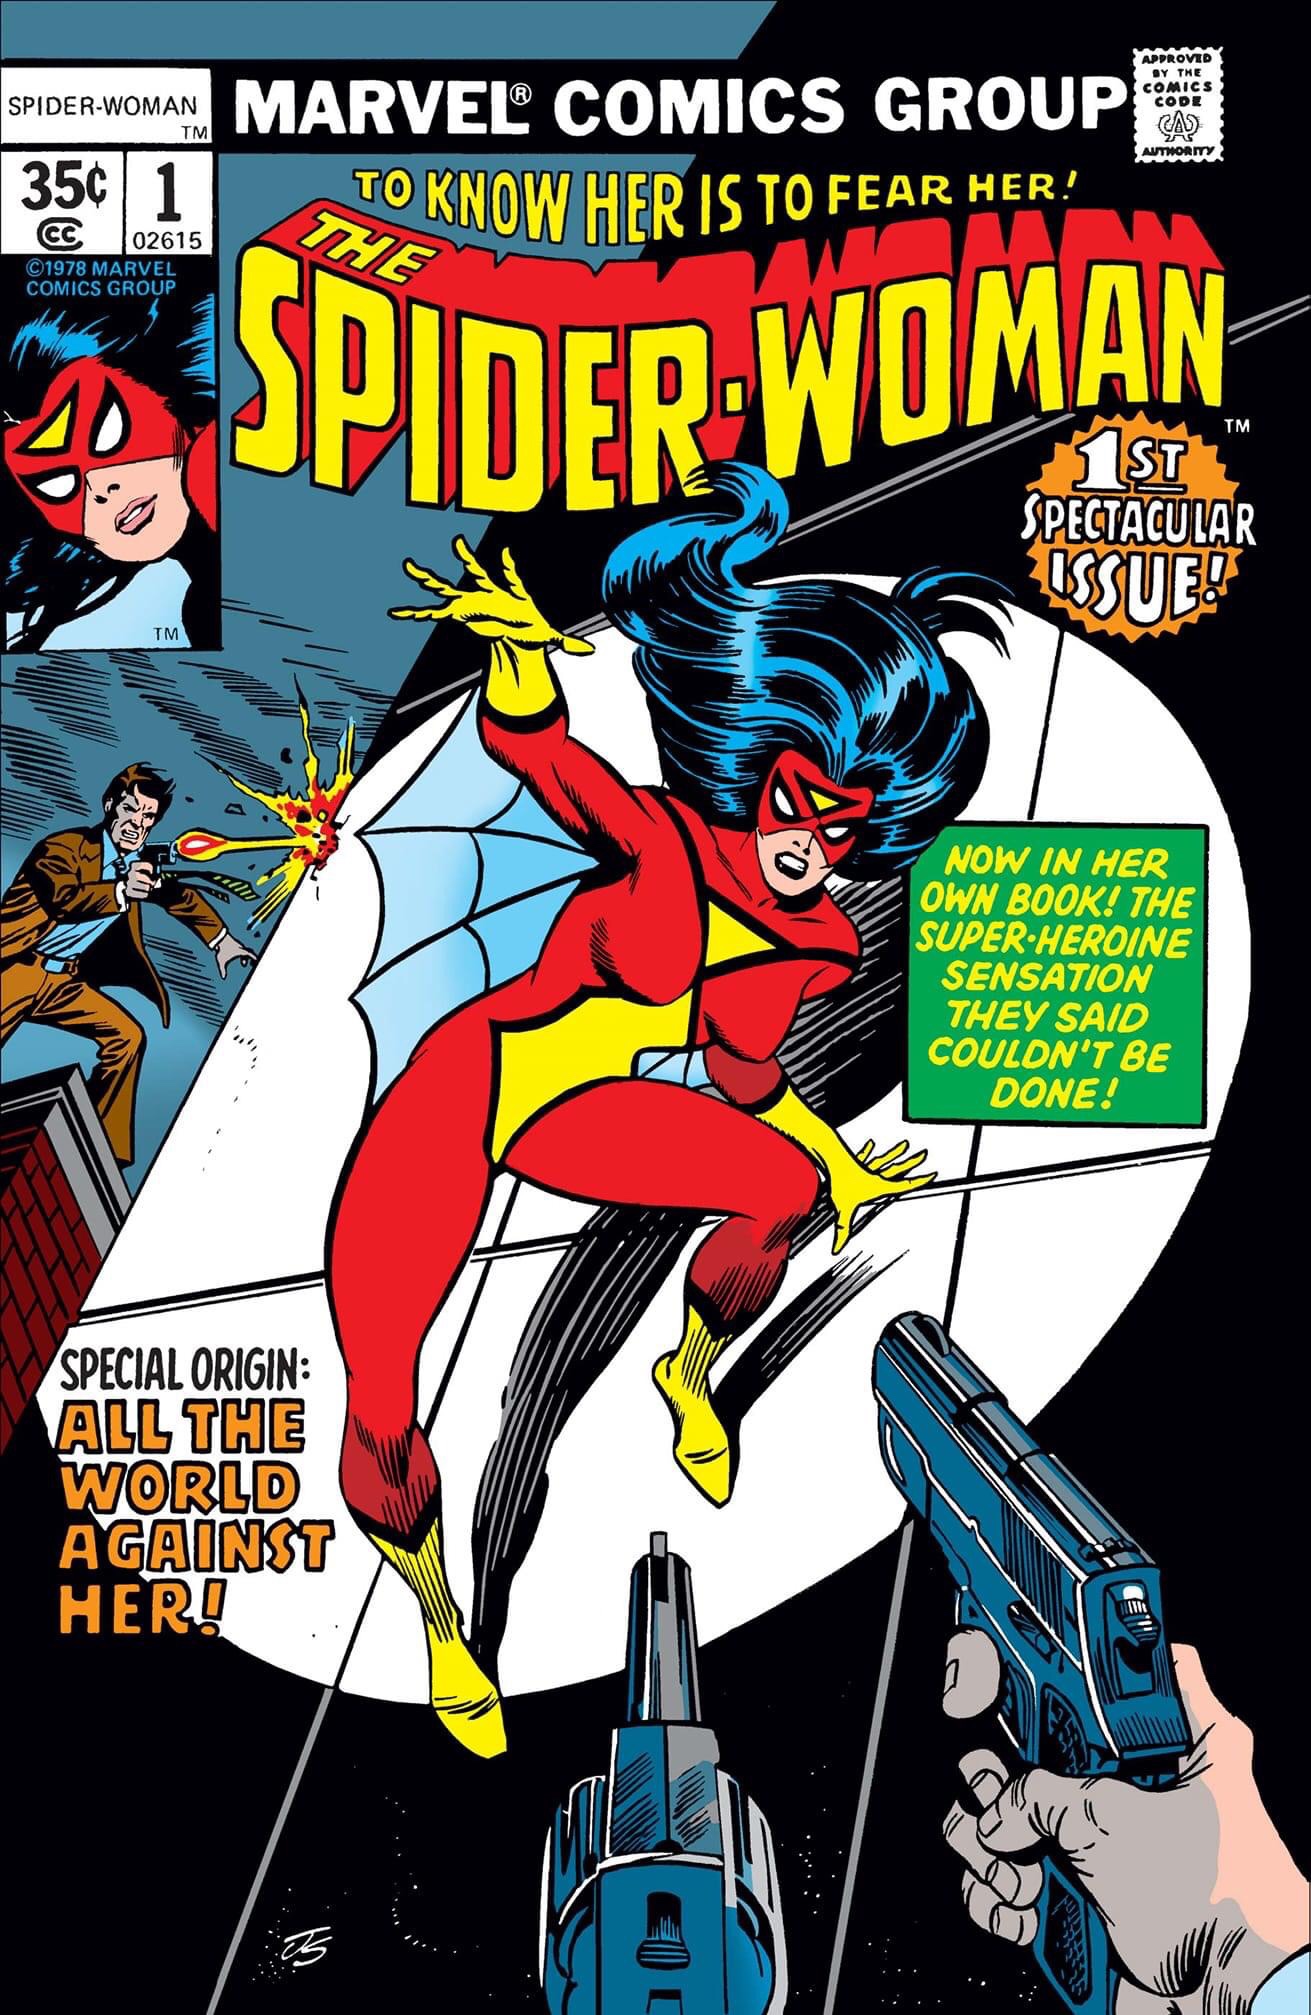 Spider-Woman #1 - Cover